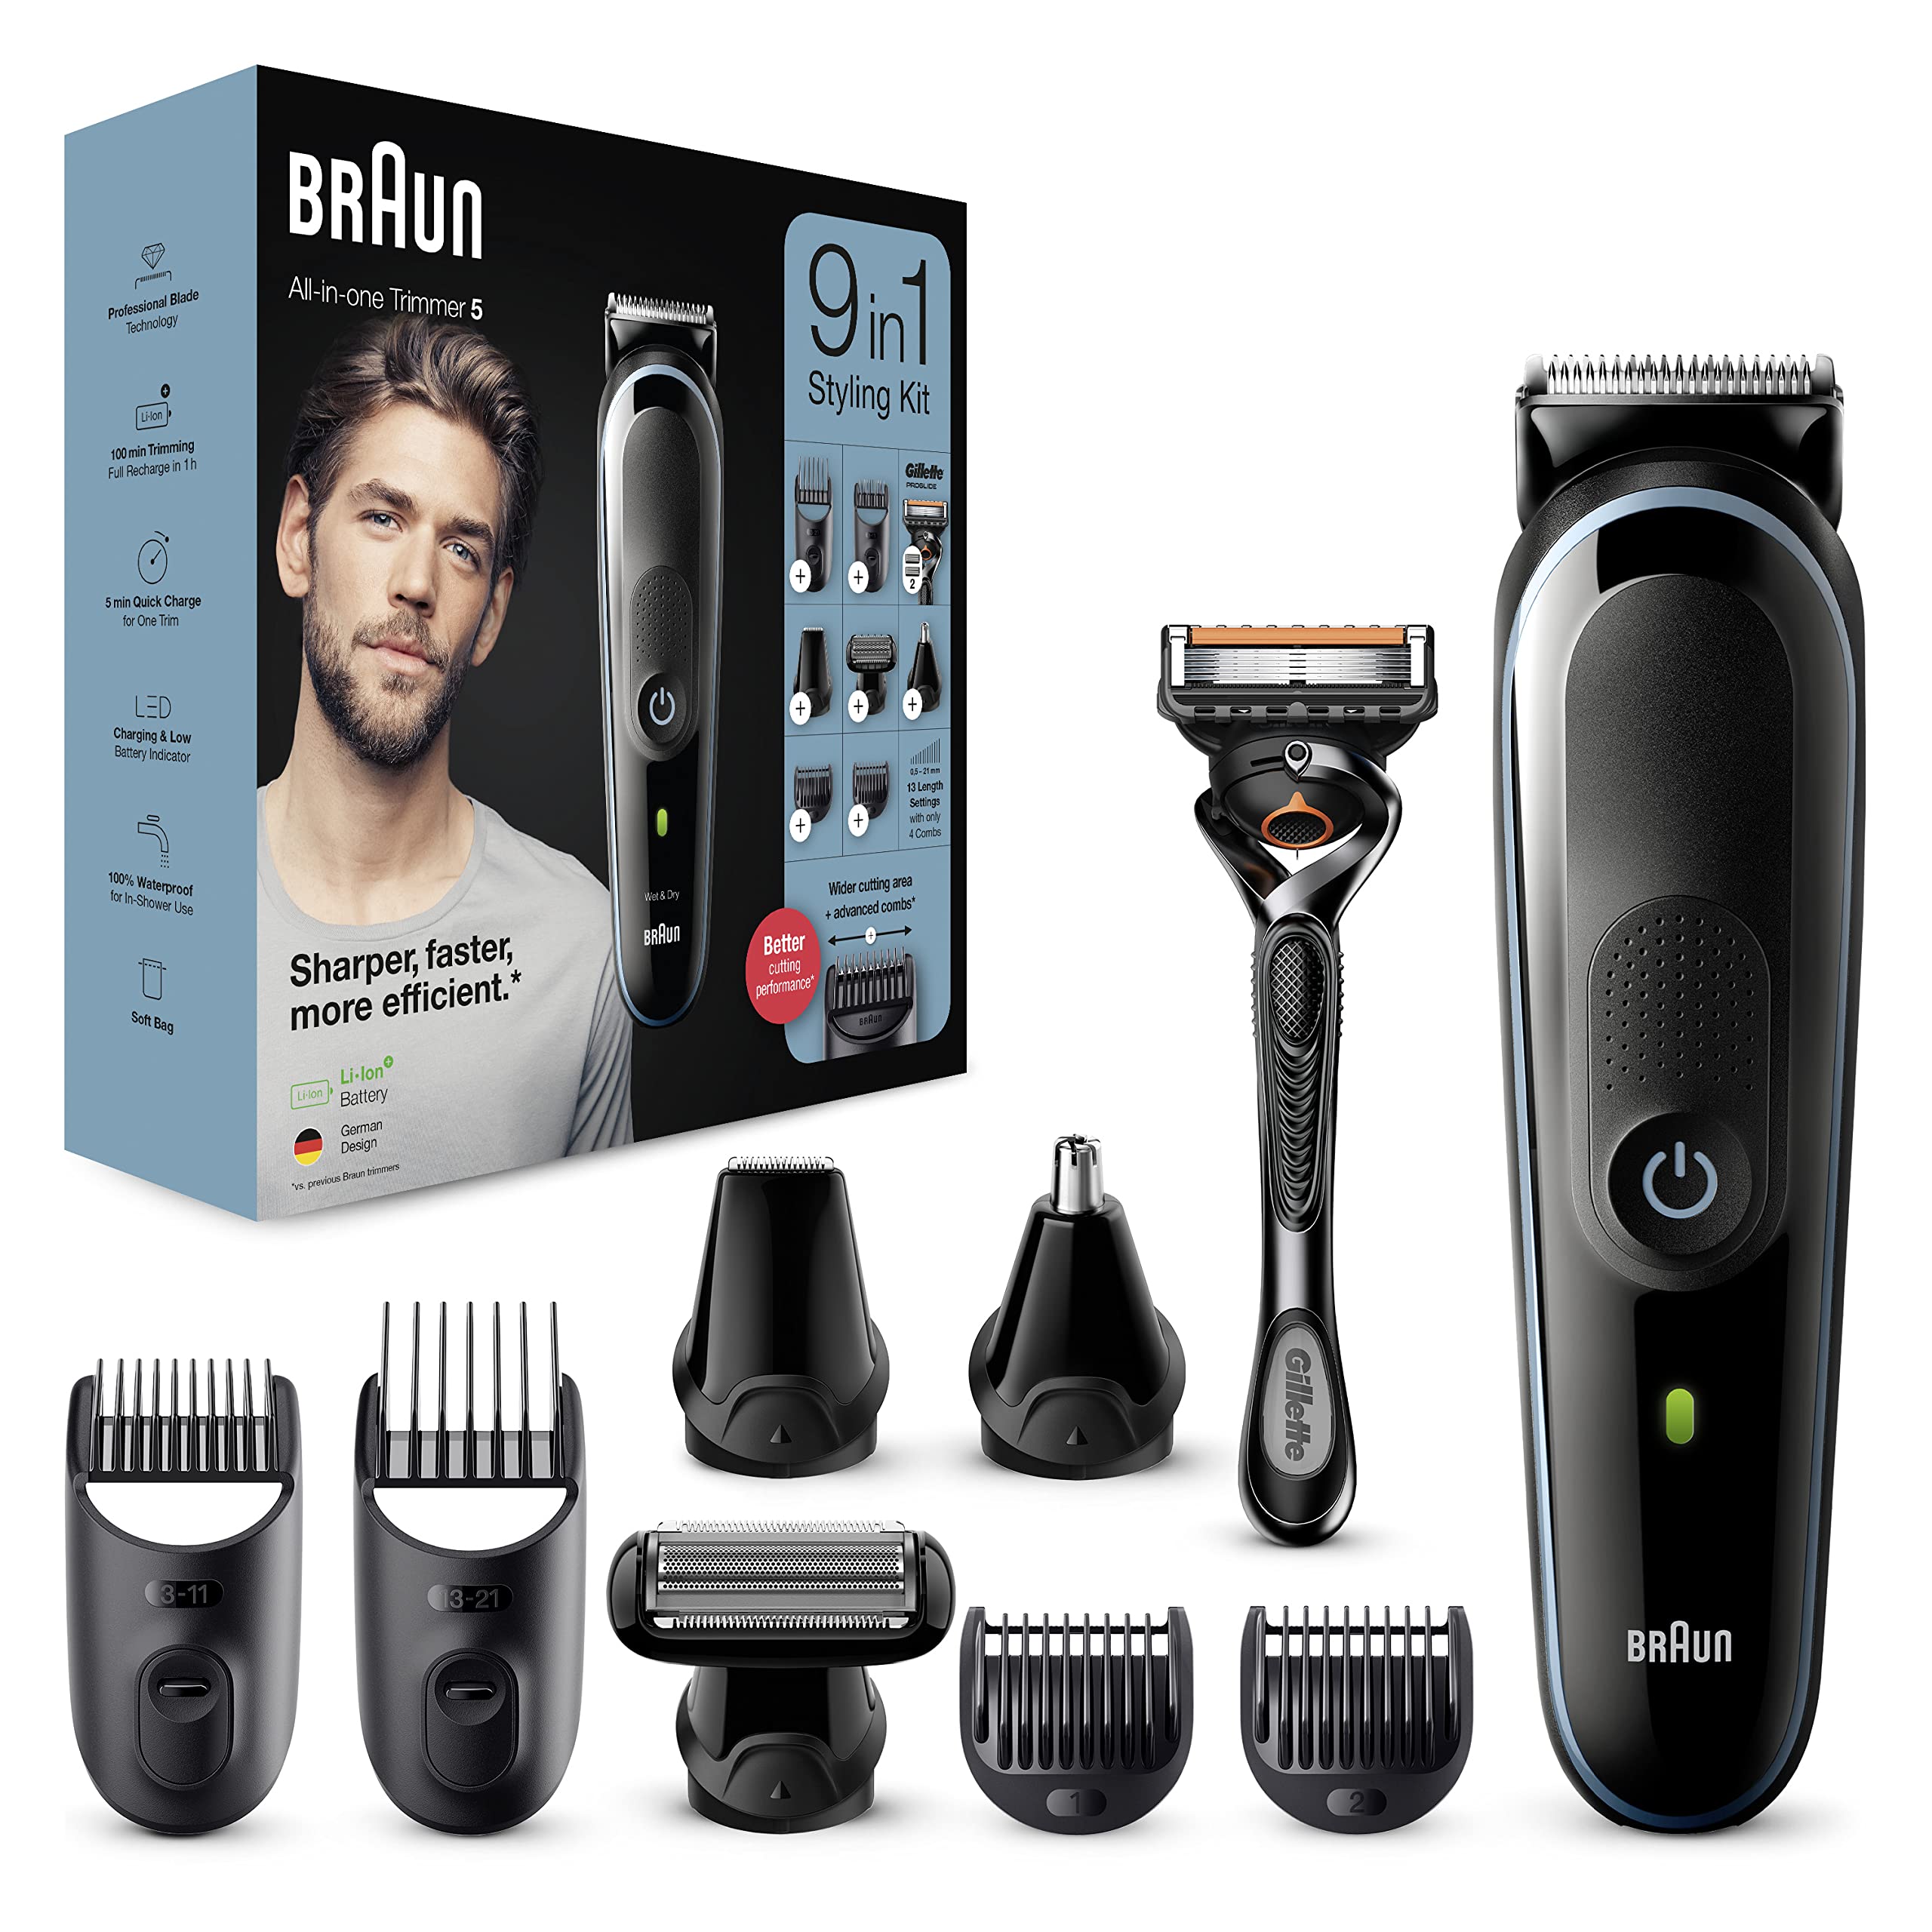 Mua Braun 9-in-1 All-In-One Trimmer Series 5, Male Grooming Kit With Beard  Trimmer, Hair Clippers, Ear & Nose Trimmer & Gillette Razor, 7 Attachments,  Gifts For Men, UK 2 Pin Plug,MGK5280,Black/Blue Razor